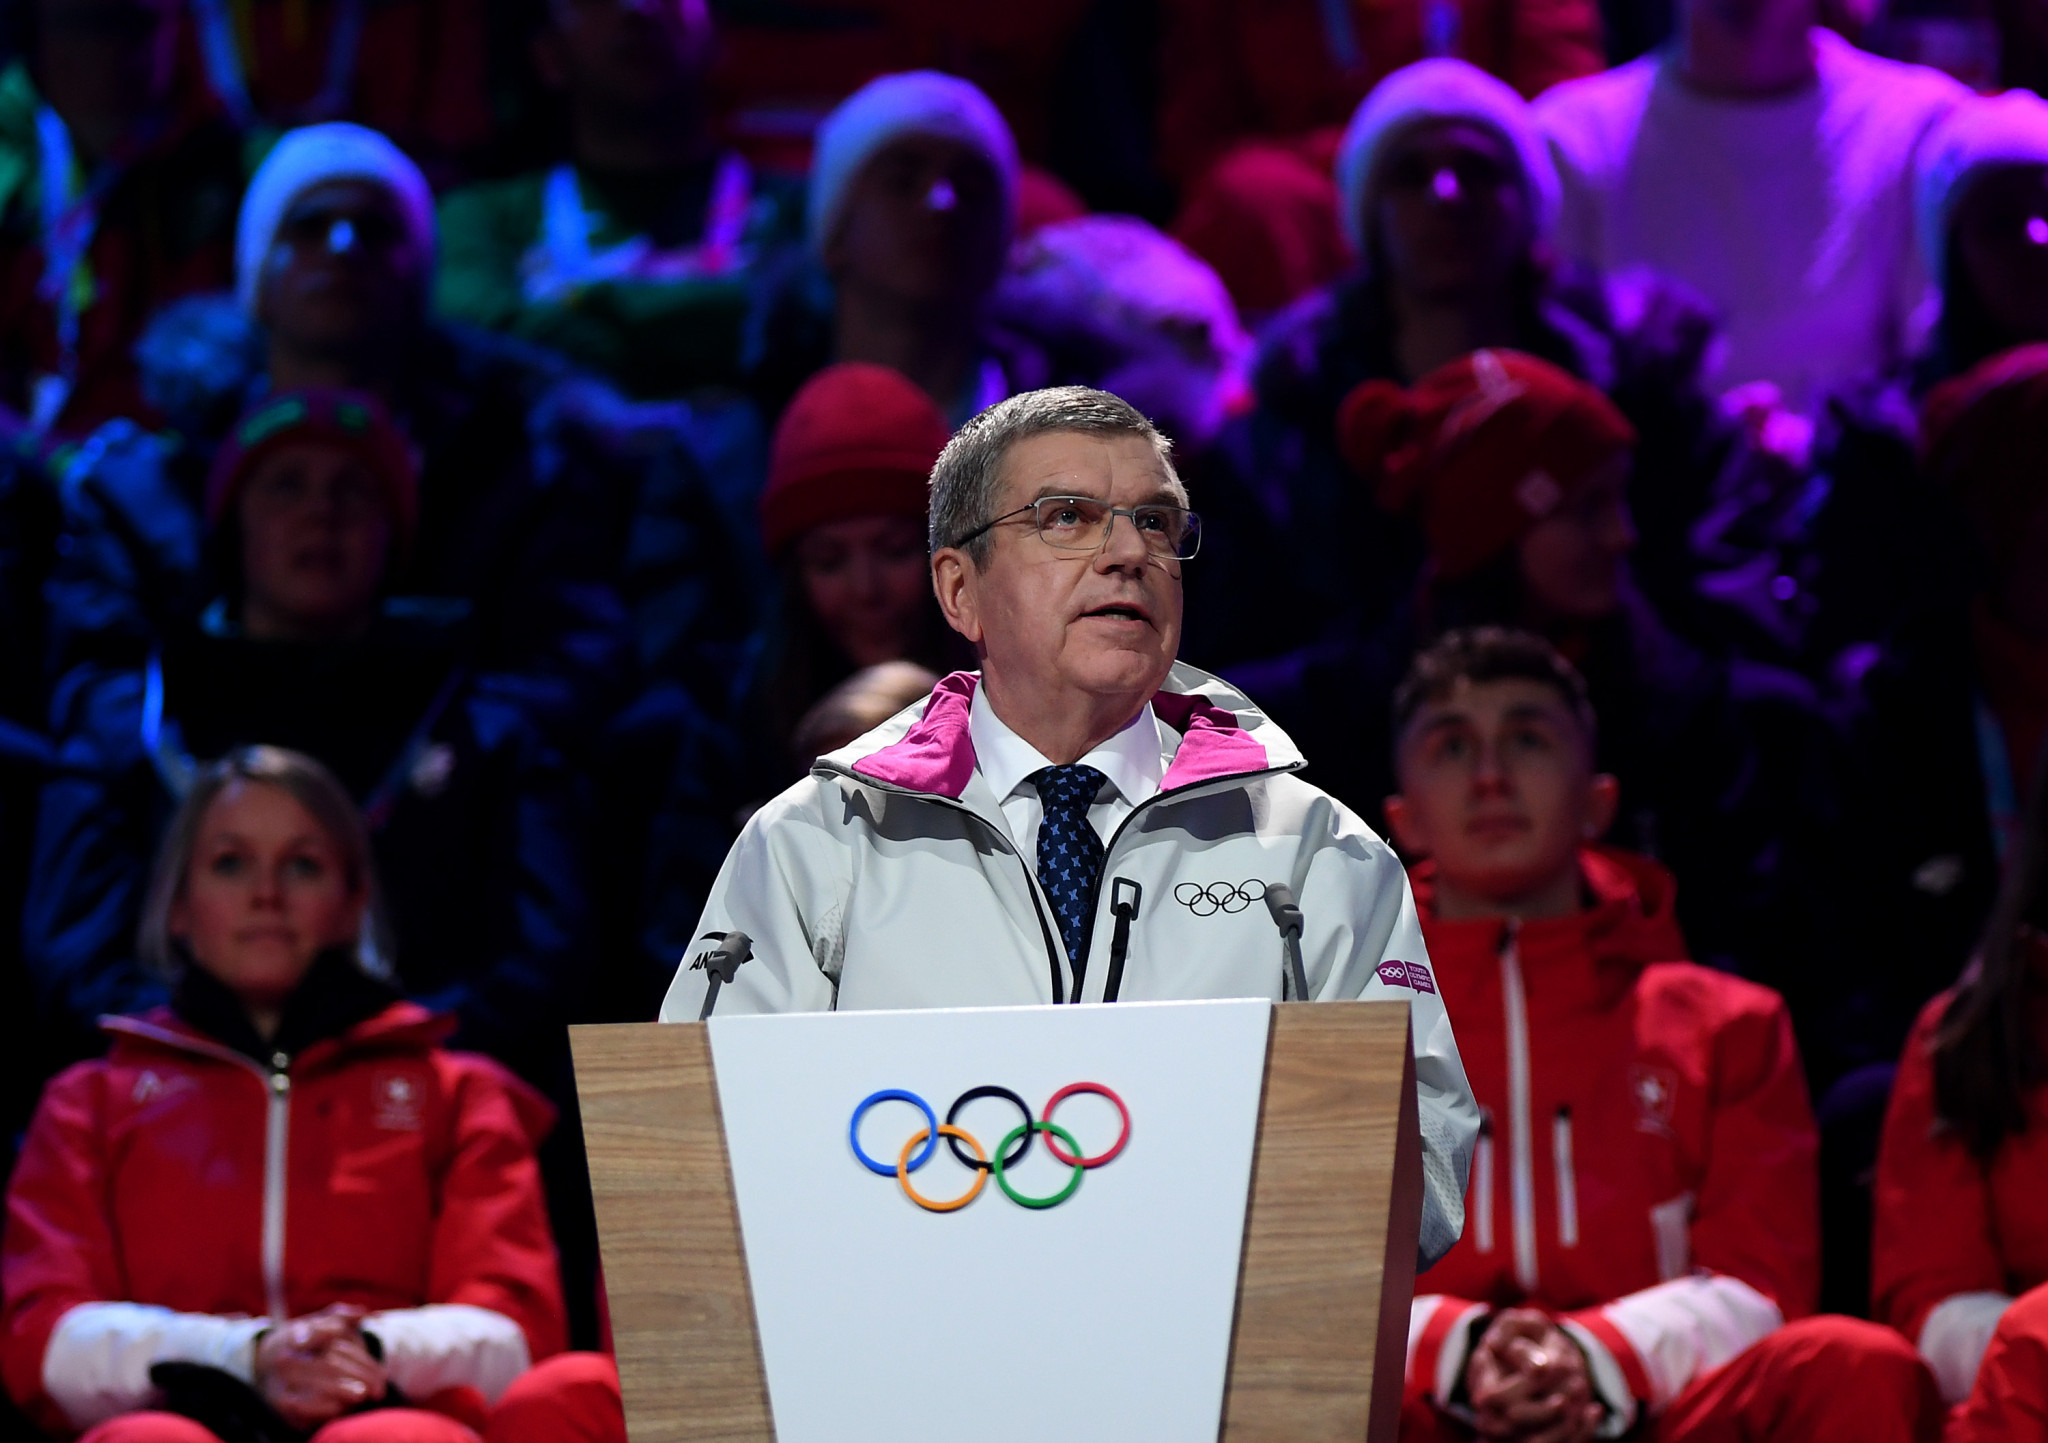 International Olympic Committee President Thomas Bach also welcomed the athletes to their 